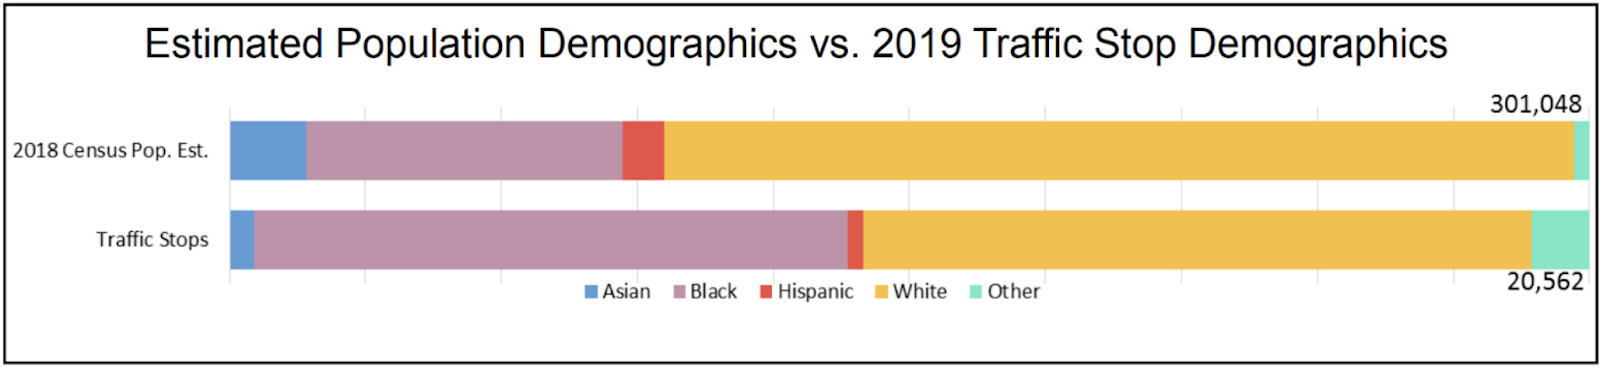 [Graph is from the 2019 Pittsburgh Police Annual Report and is titled: Estimated Population Demographics vs 2019 Traffic Stop Demographics. There are two bar graphs. One shows the relative proportions of Asian, Black, Hispanic, White, and other from a 2018 Census estimate. The second shows the relative proportions of traffic stops for each of those demographics. Overall it shows that Asians, Hispanics and Whites are stopped by police at less than their percent of the population, while Blacks are stopped at a rate that is larger than share of the population]